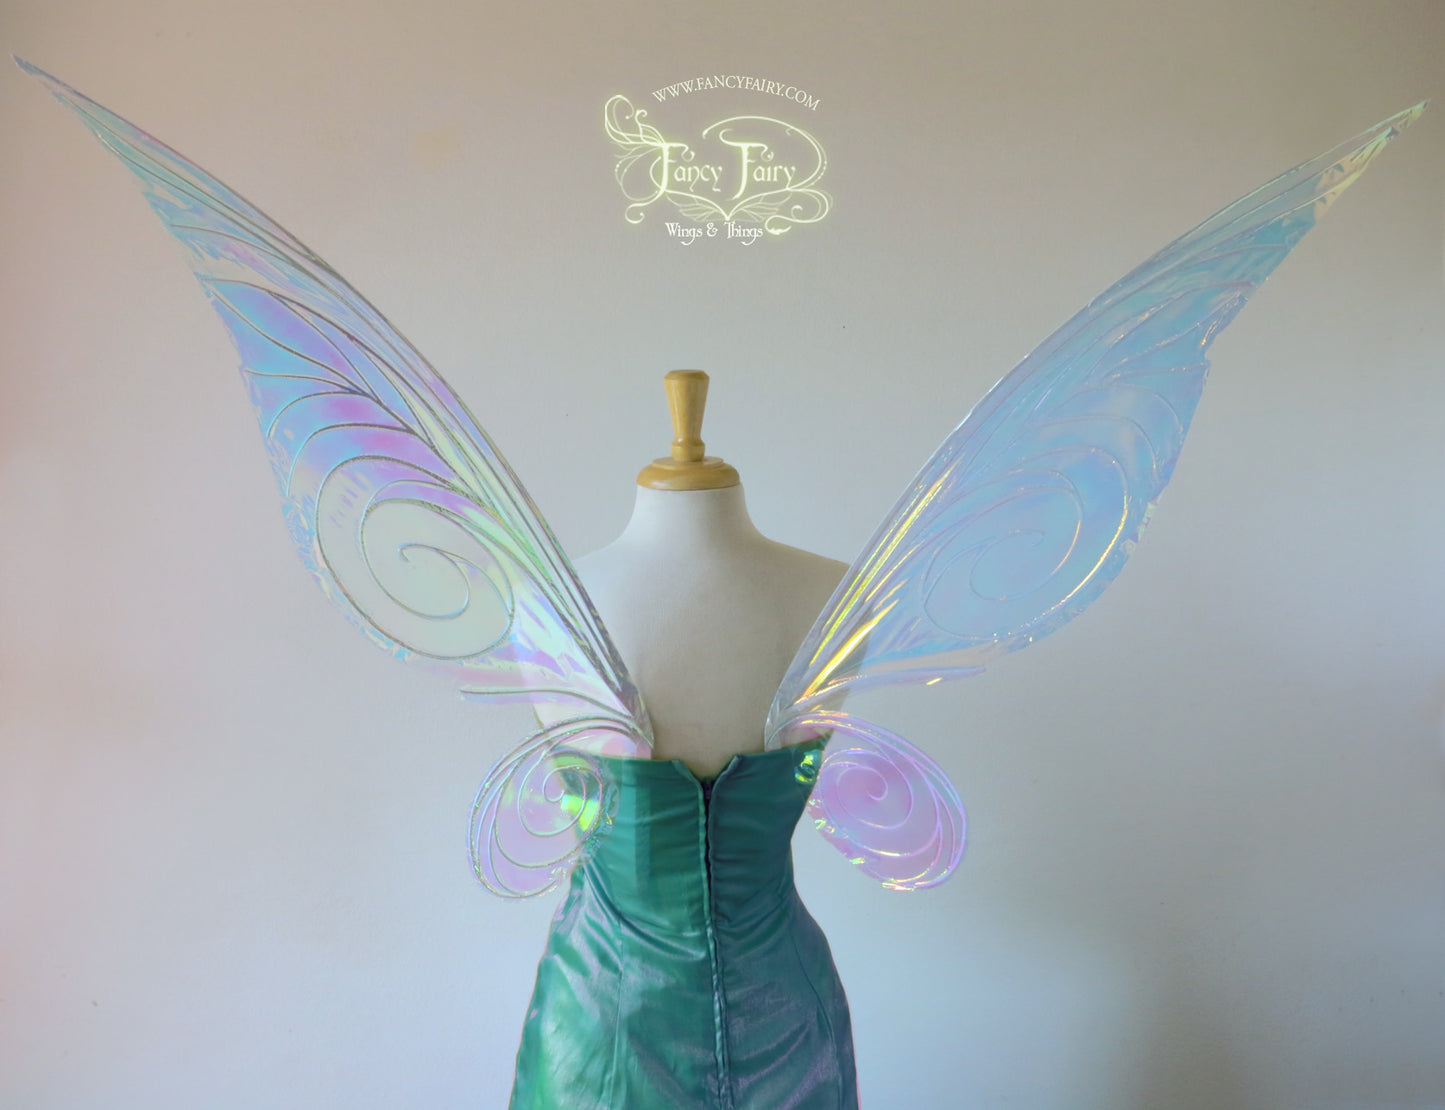 Extra Large Silvermist Iridescent Fairy Wings in Clear with Pearl veins